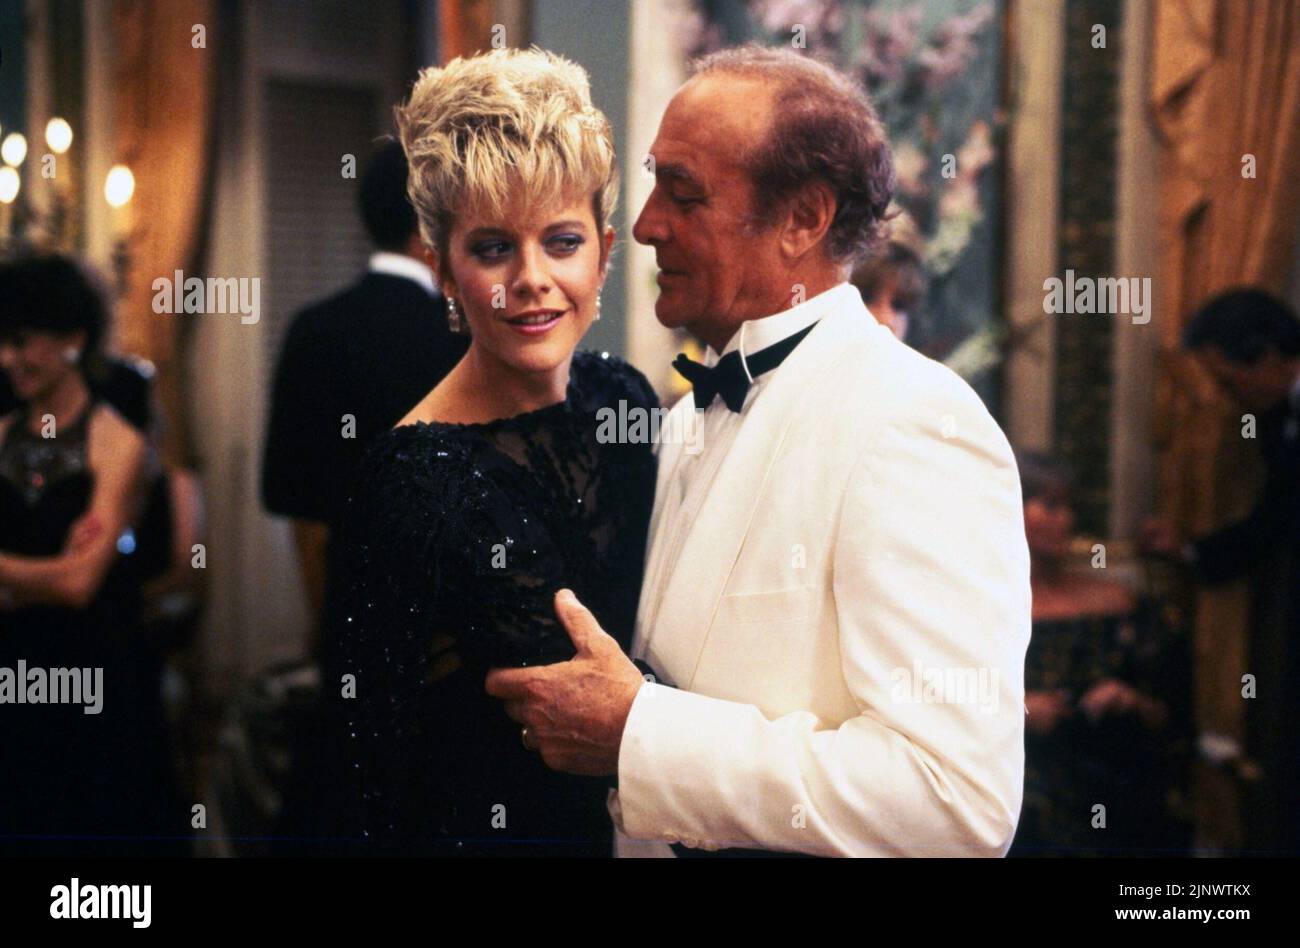 ROBERT LOGGIA and MEG RYAN in ARMED AND DANGEROUS (1986), directed by MARK L. LESTER. Credit: COLUMBIA PICTURES / Album Stock Photo